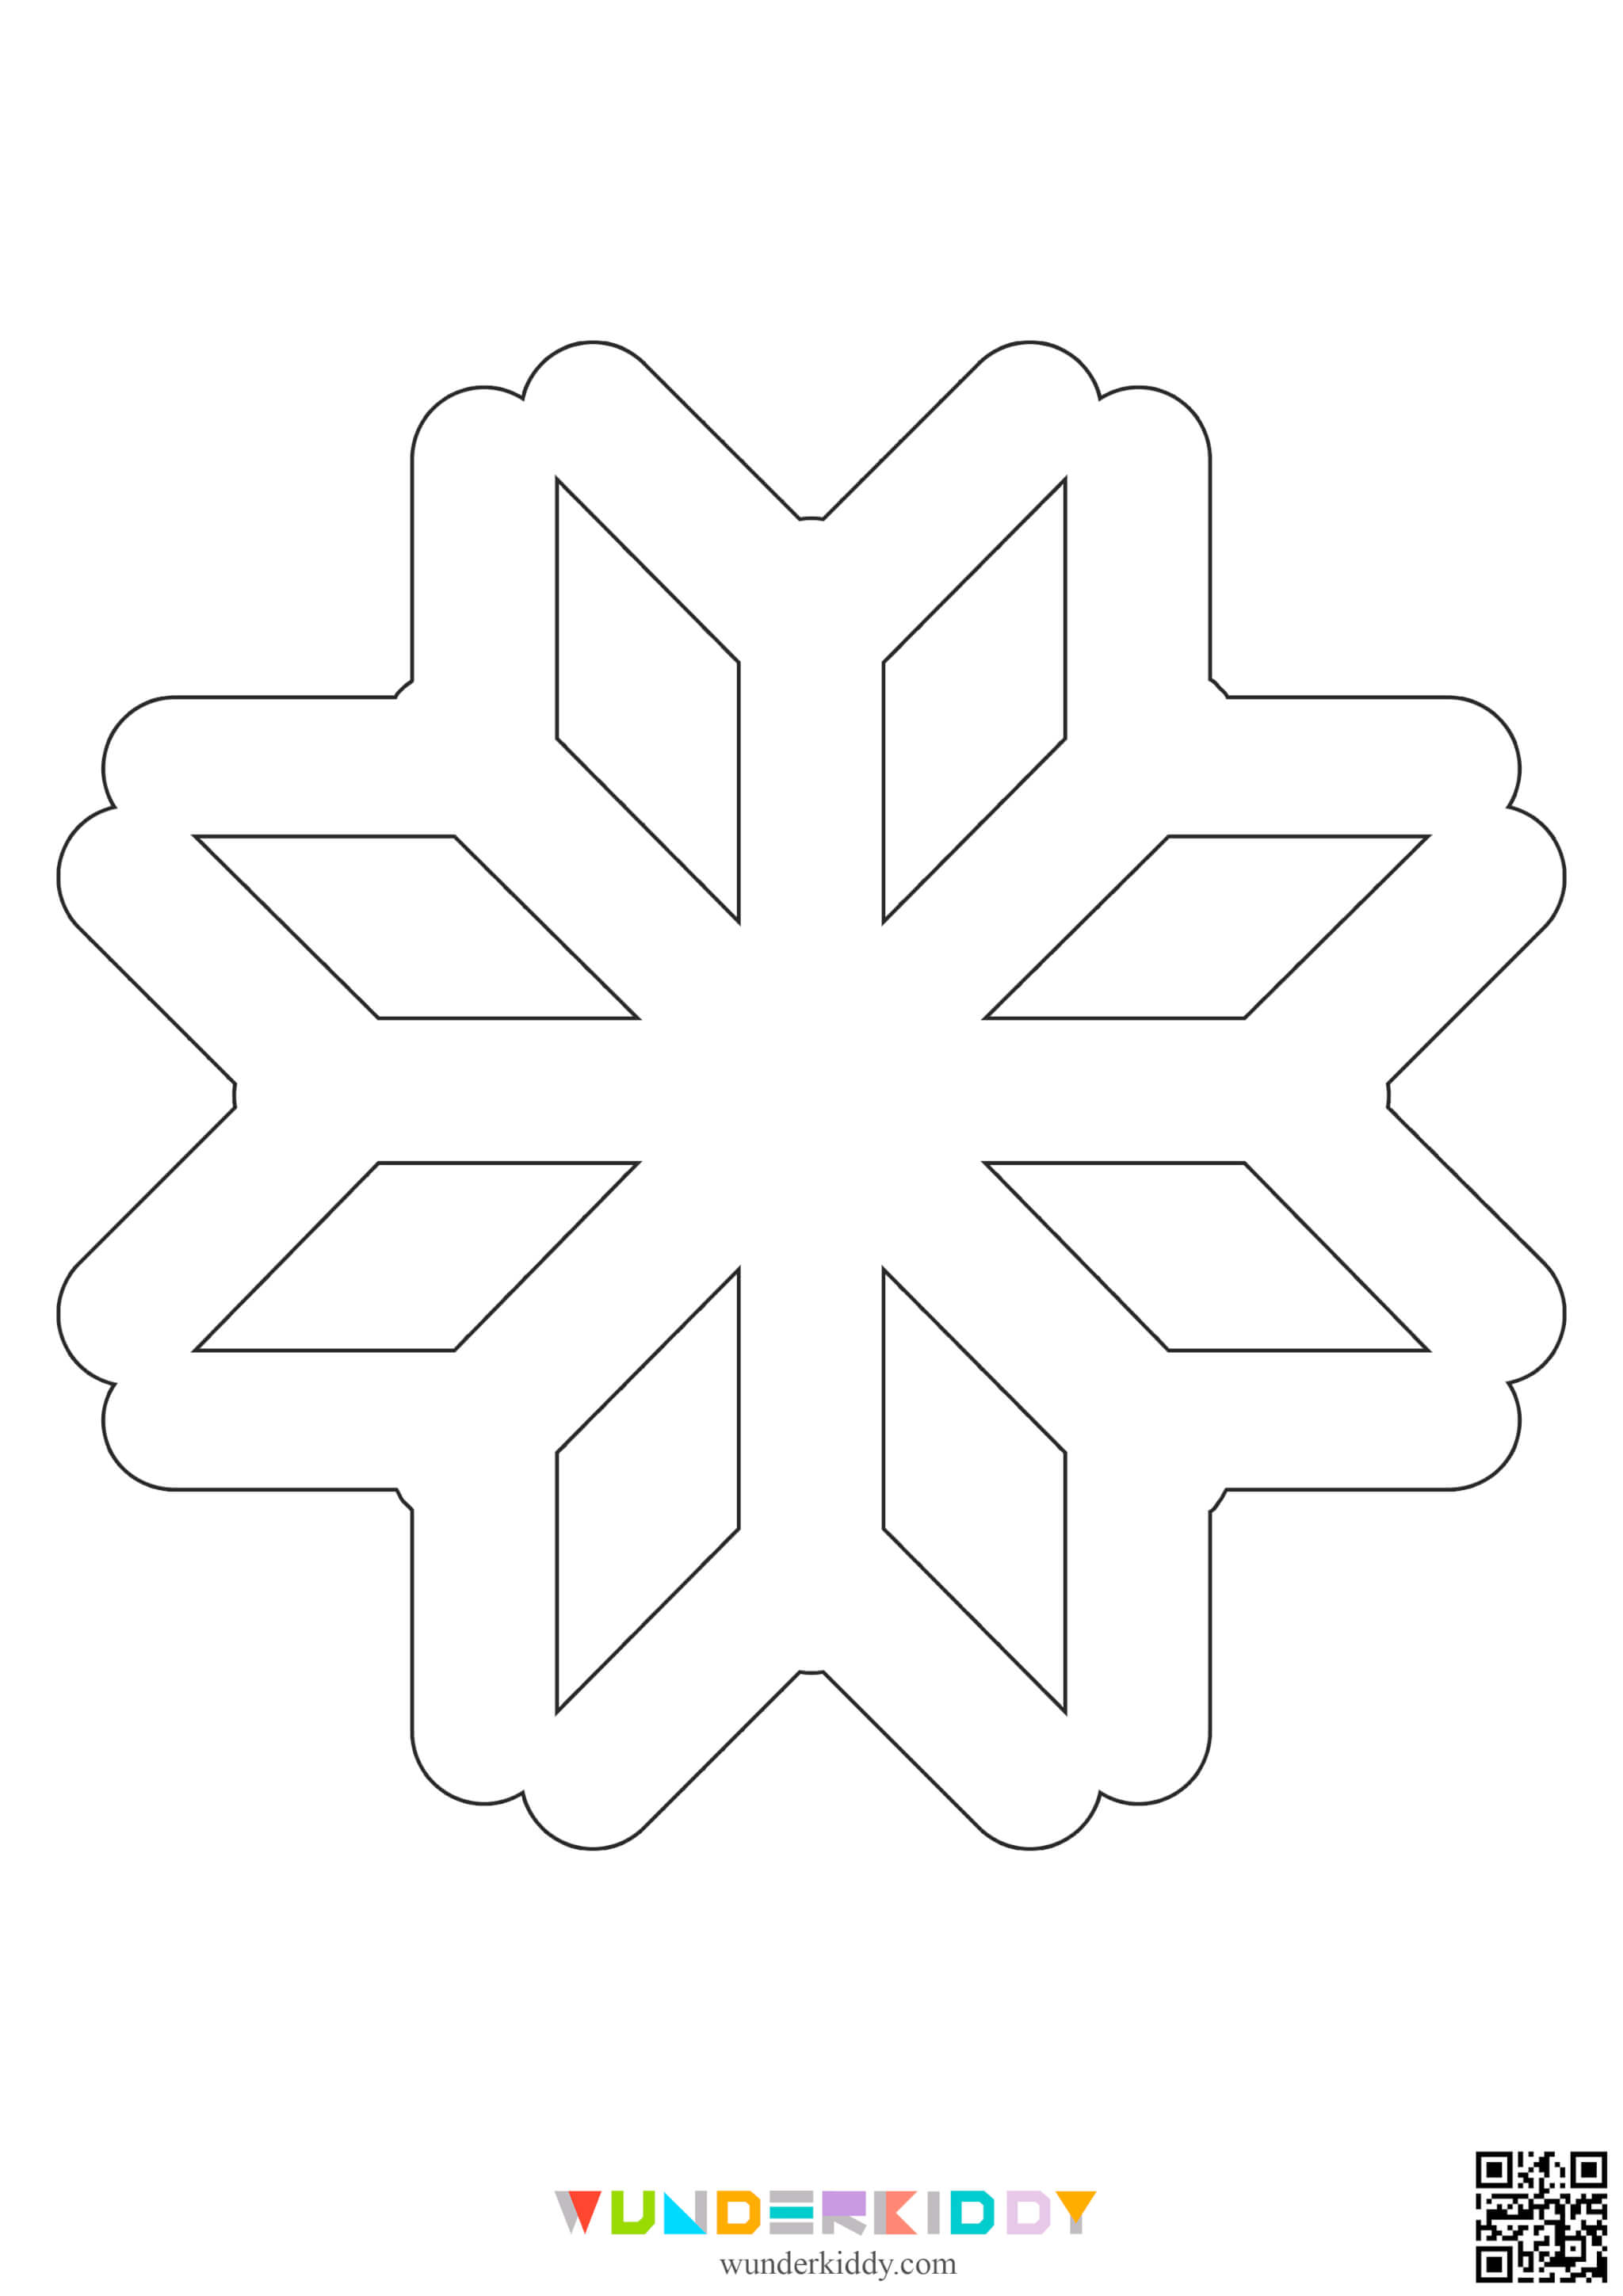 Snowflakes Template - Image 10